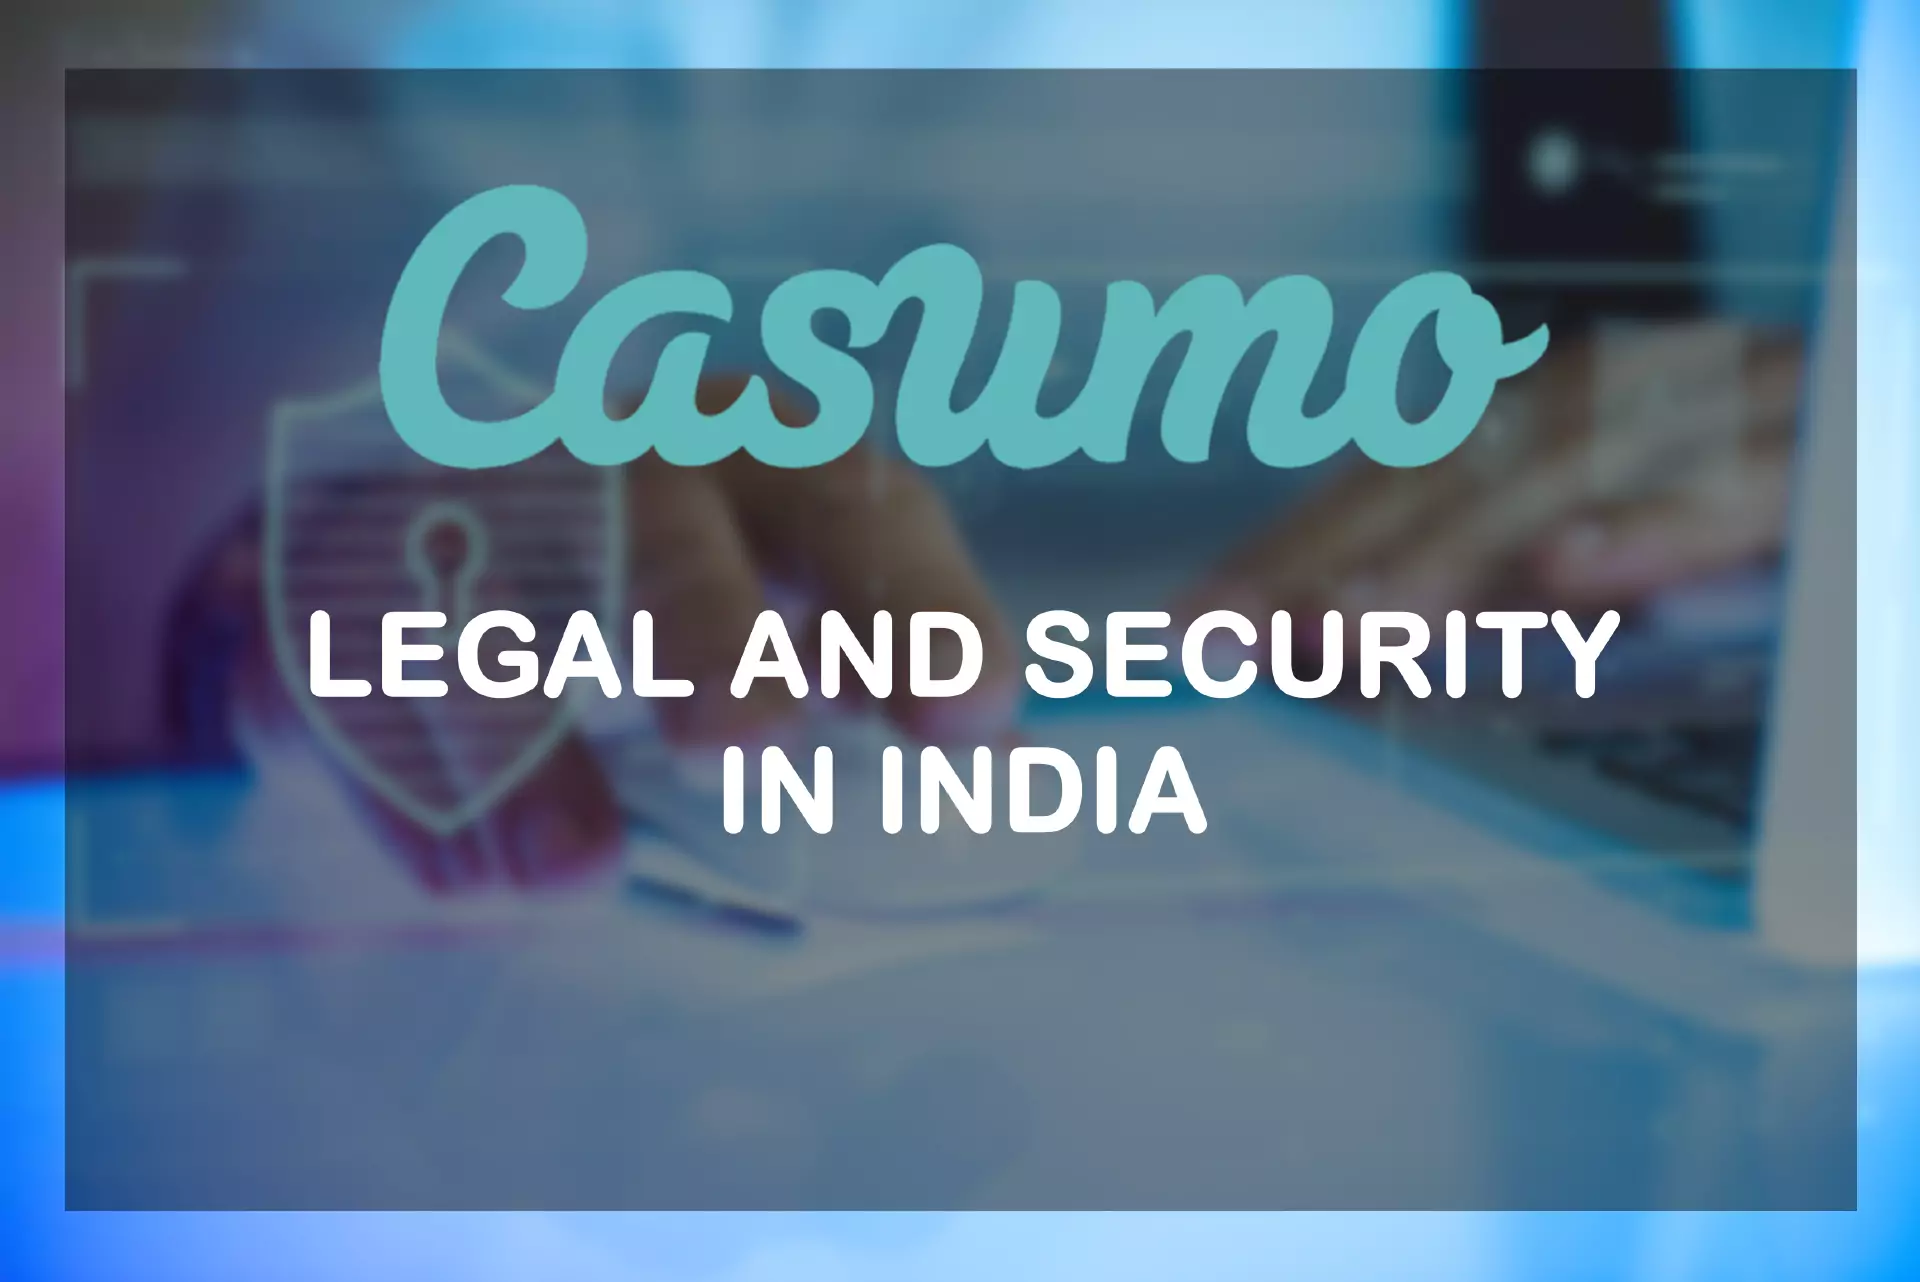 Playing casumo is totally legal and secure for users from India.